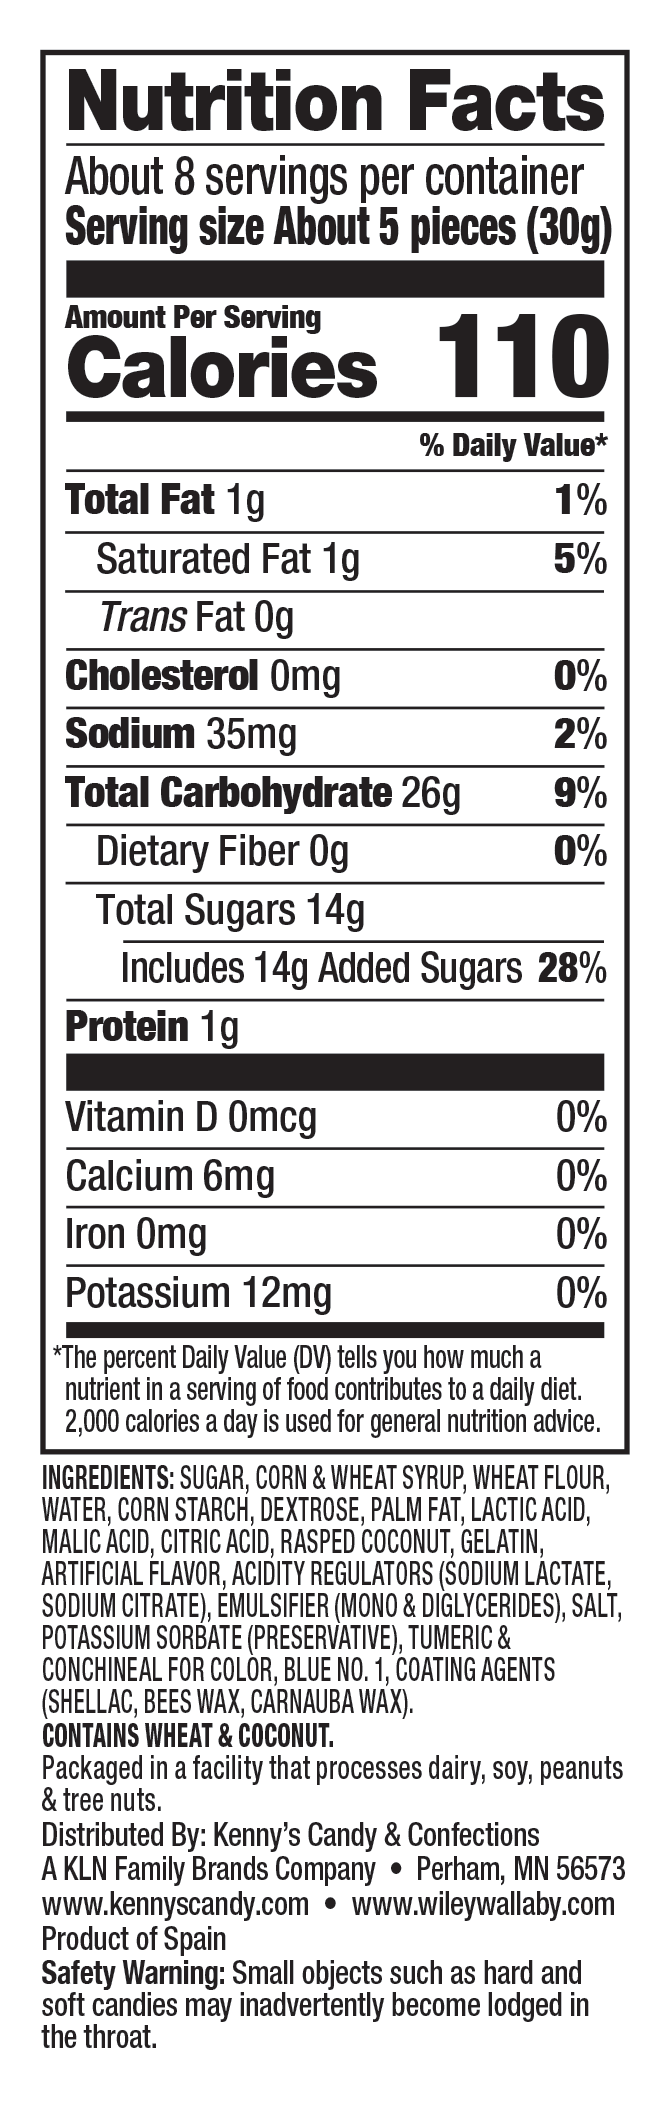 Nutrition Facts: Funsorts